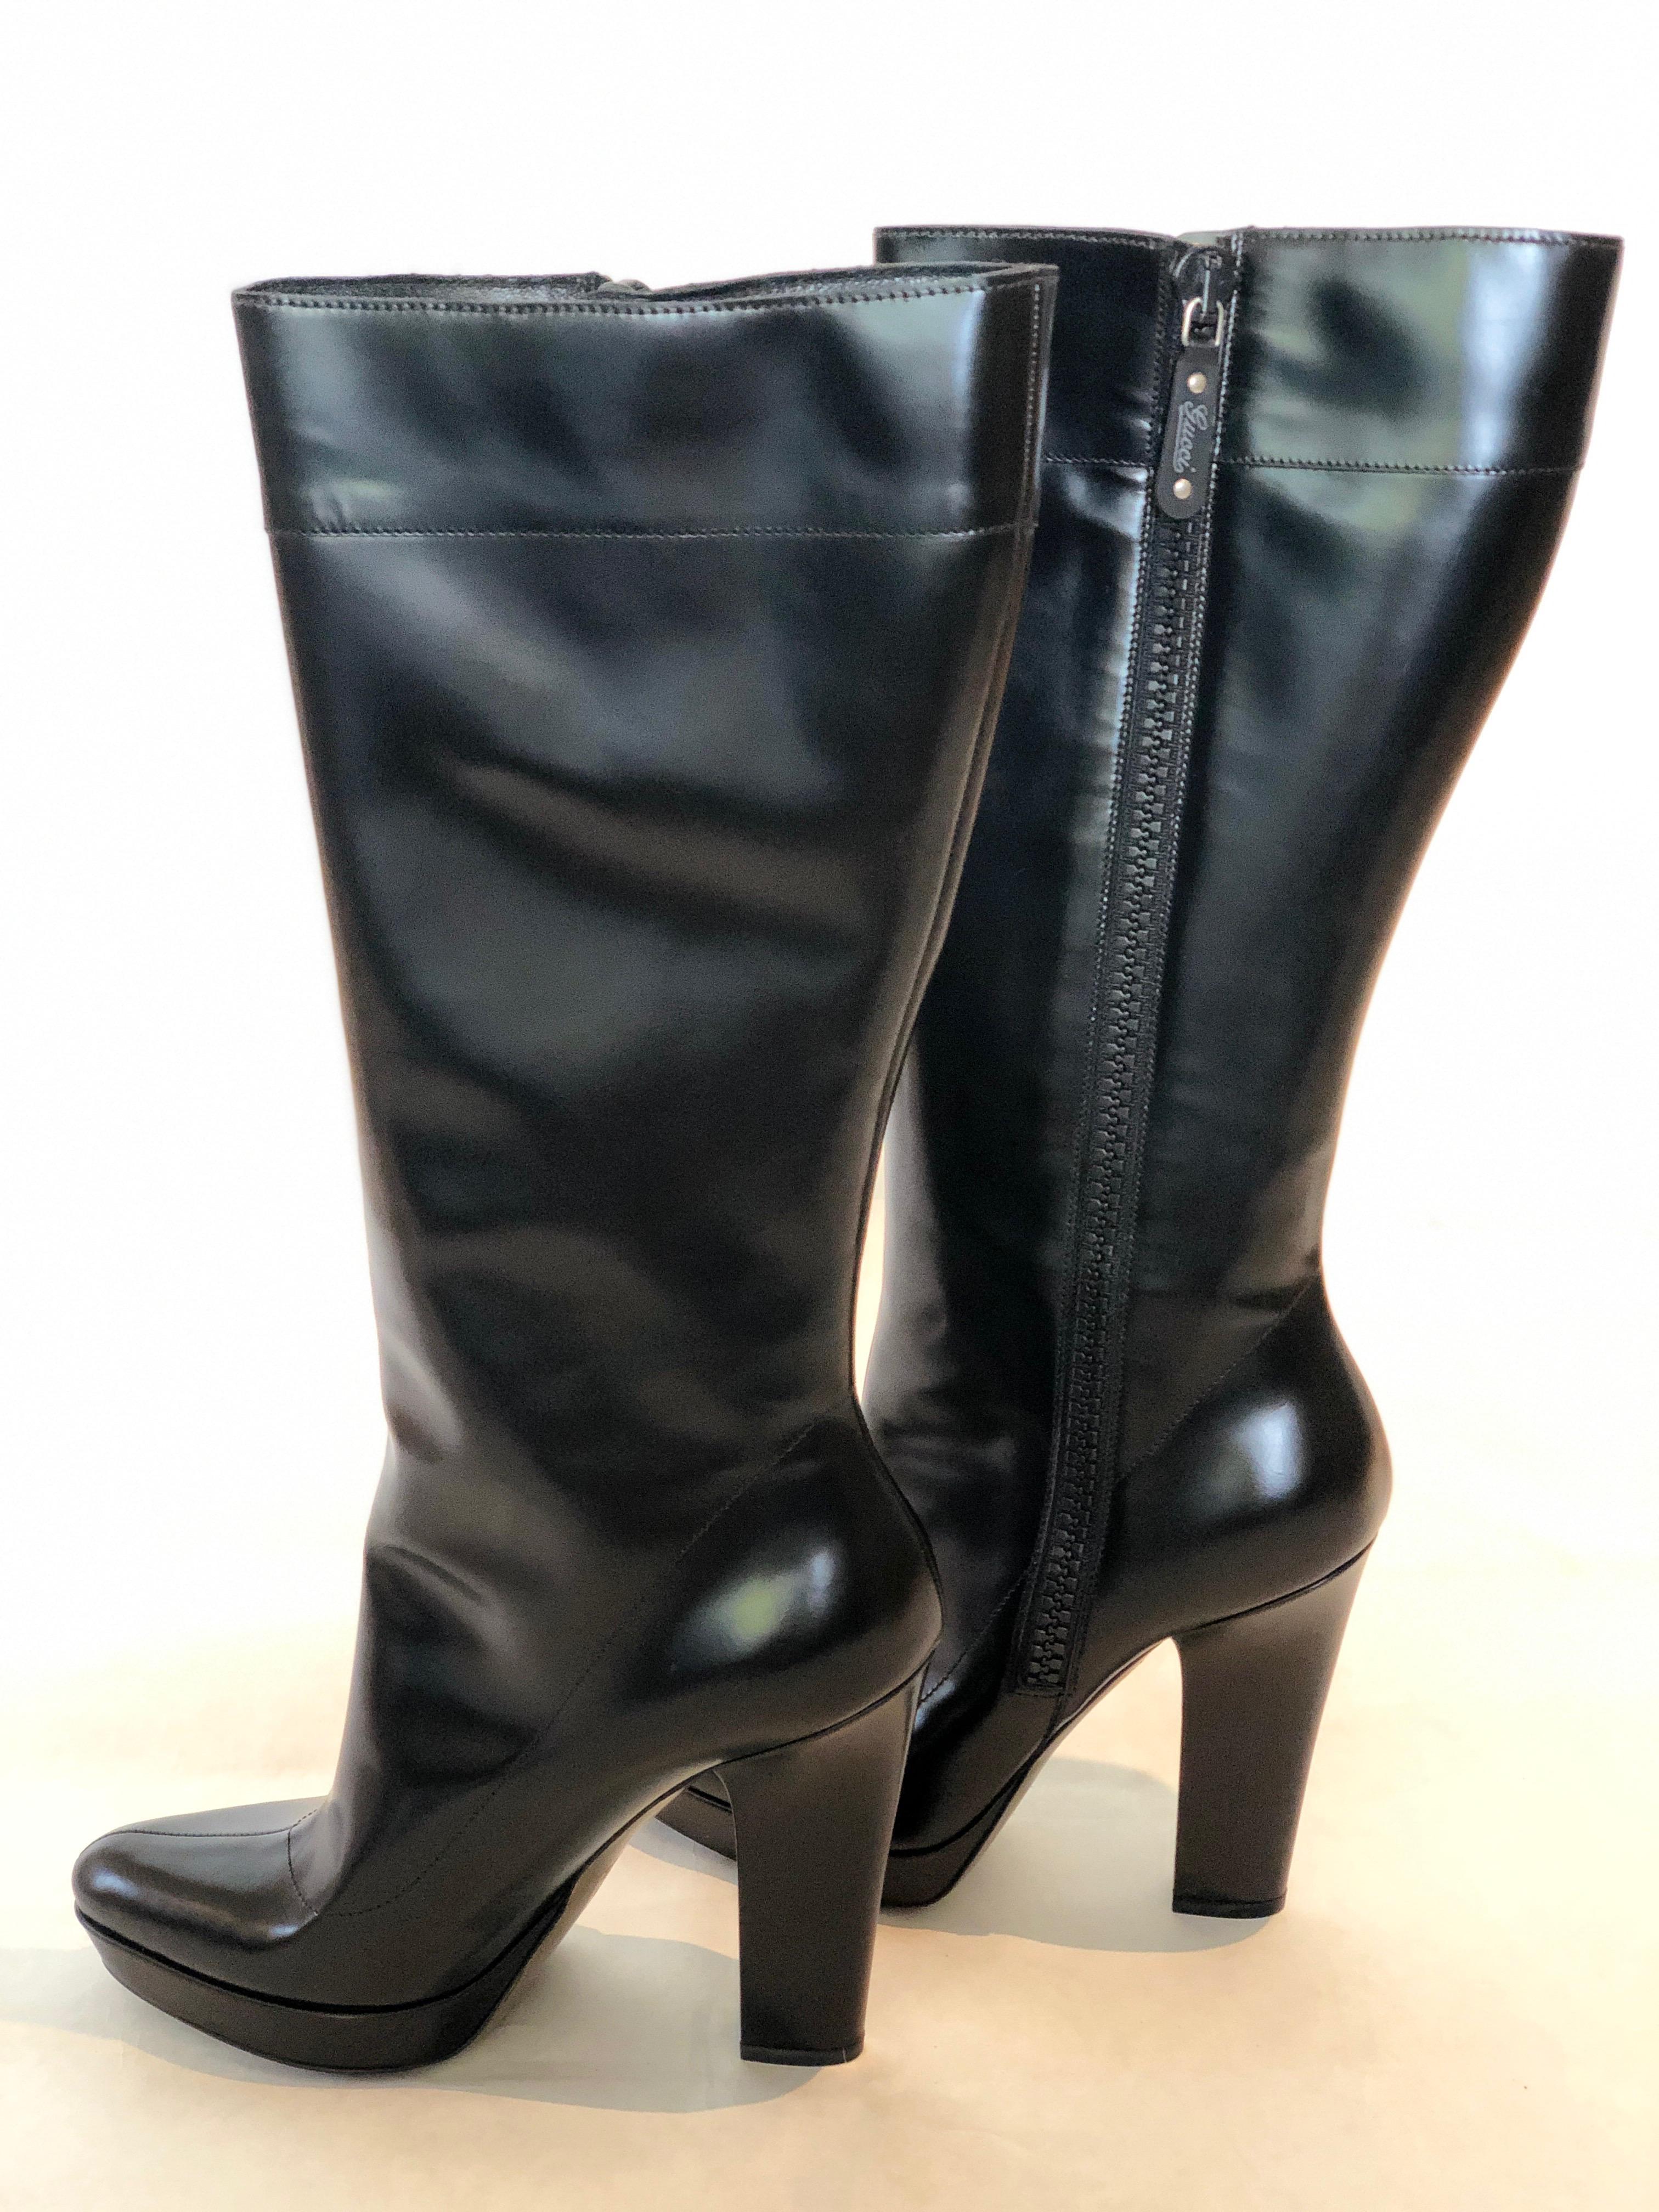 Pair of Gucci Shiny Black Side Zip Pointy Toe Platform and Heeled Knee Boots For Sale 2